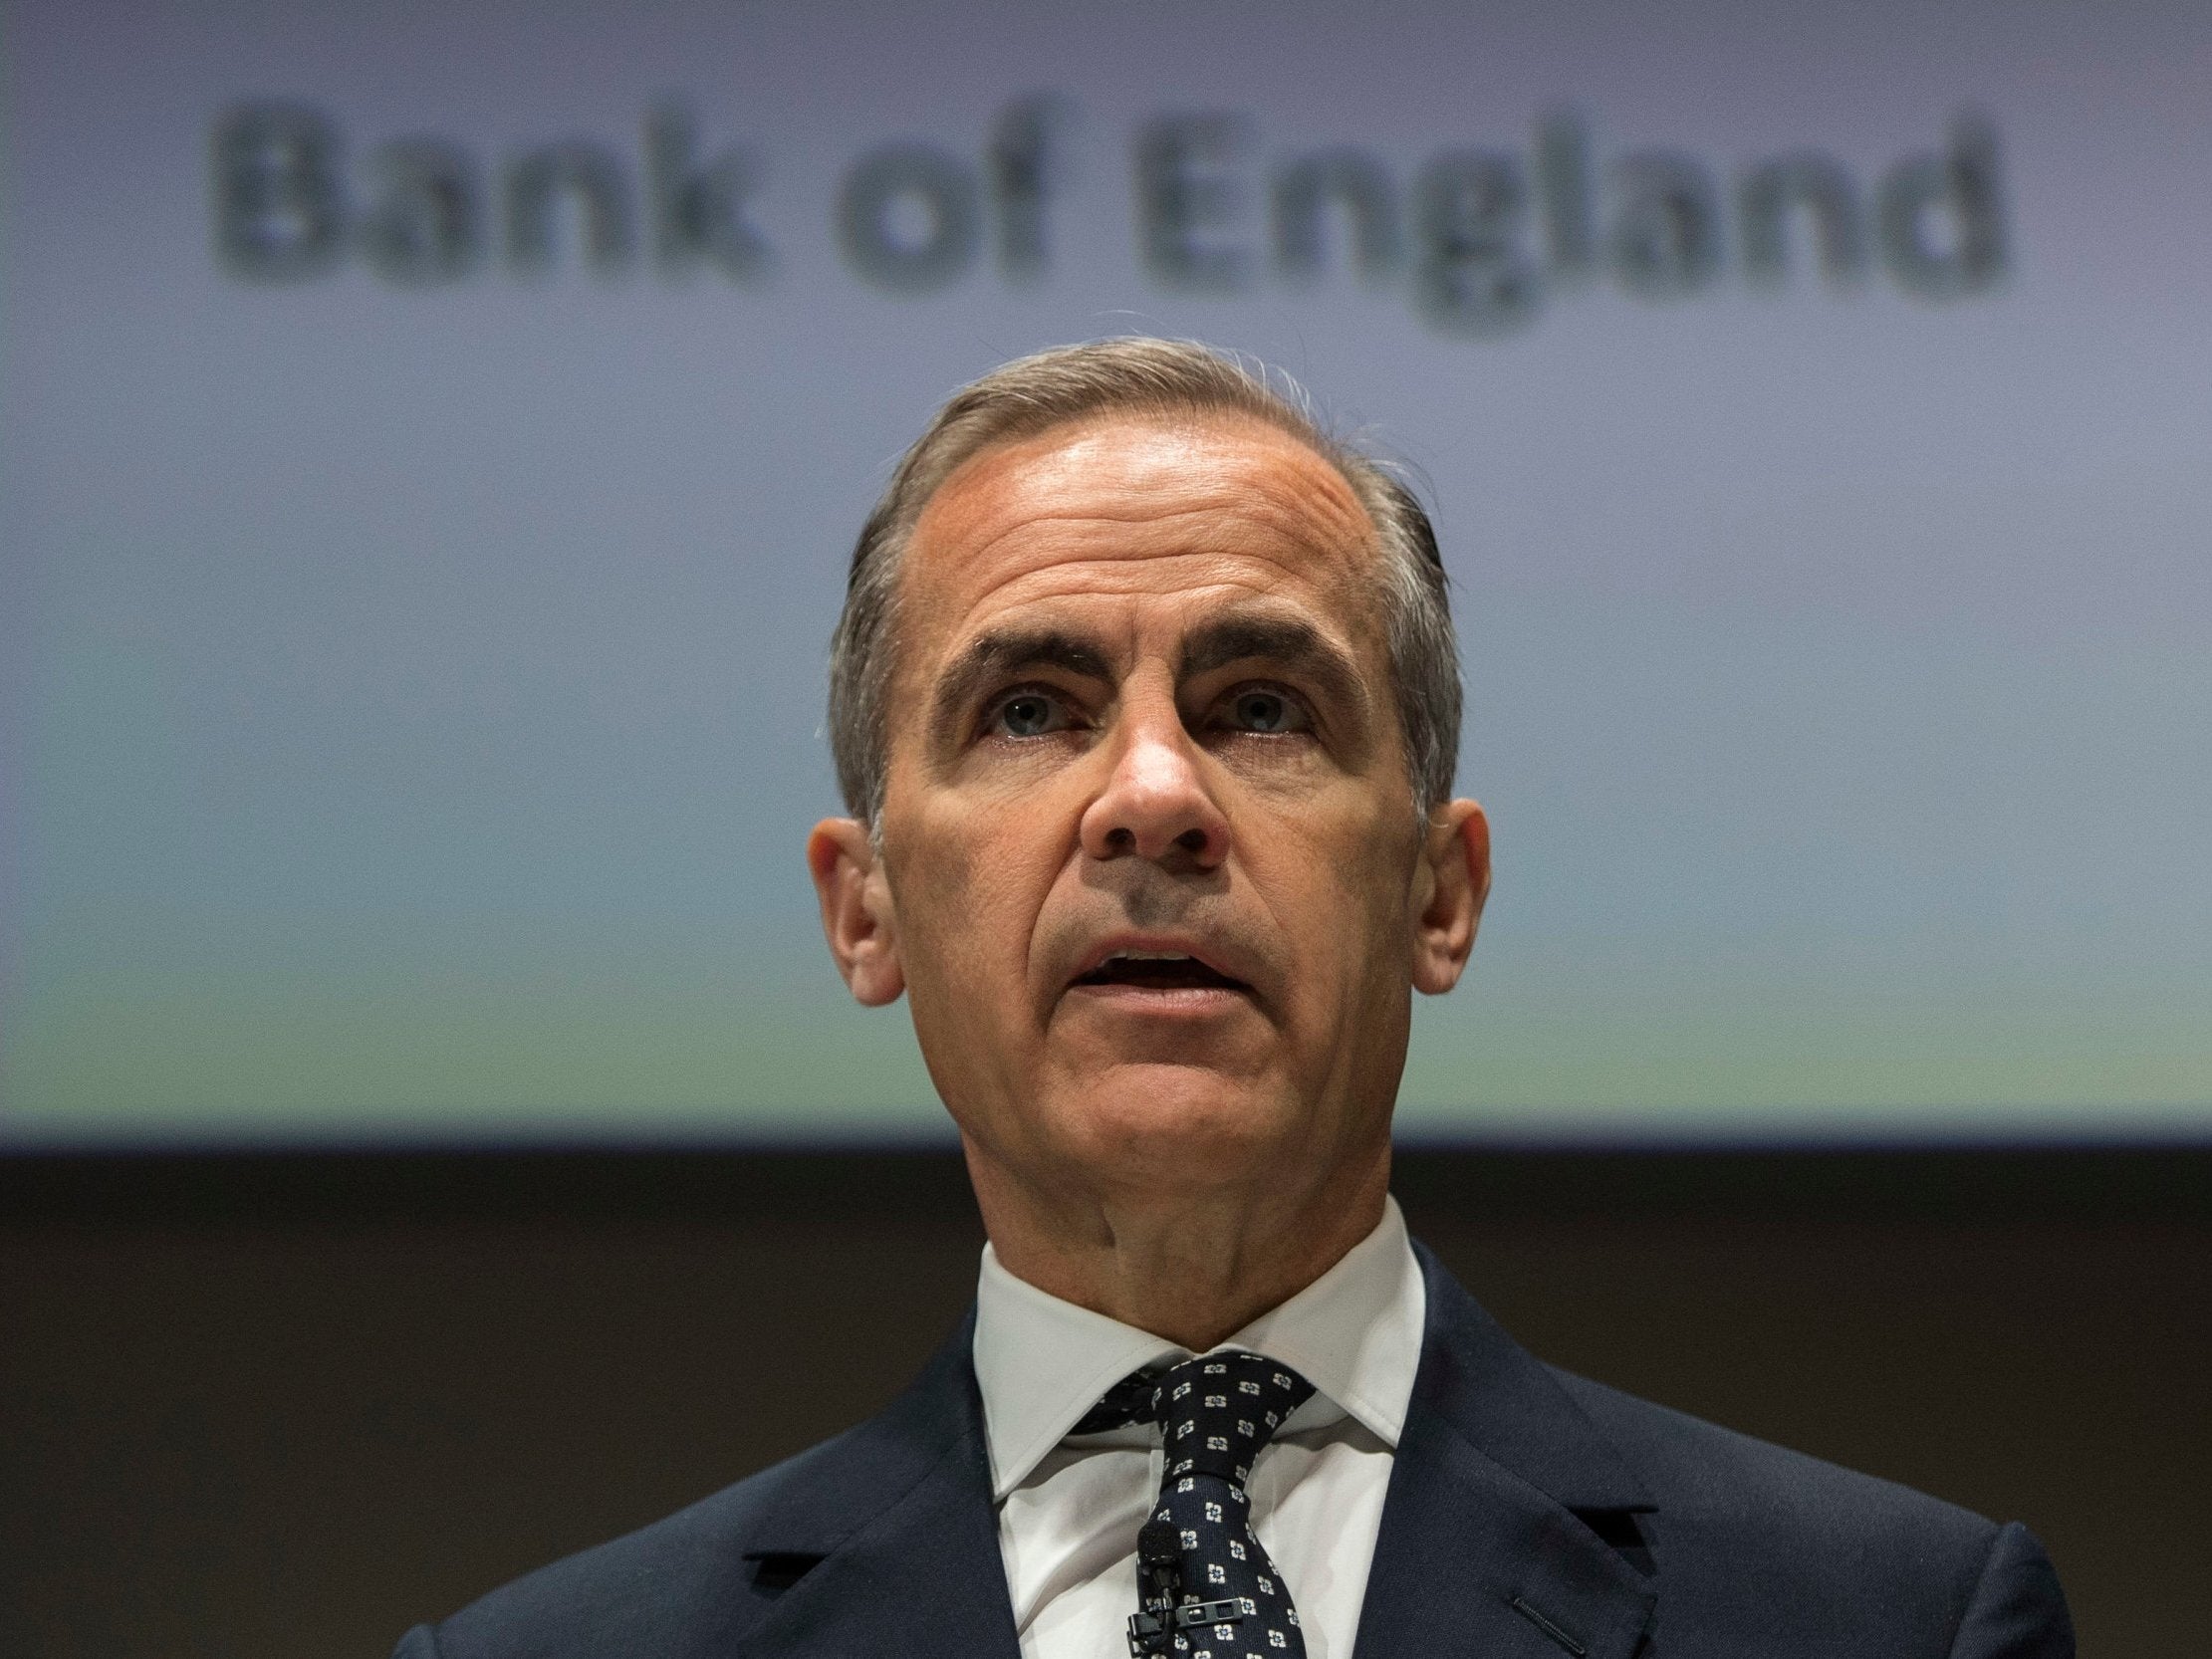 The scandal comes weeks after it was confirmed that Mark Carney would stay at the Bank until 2020